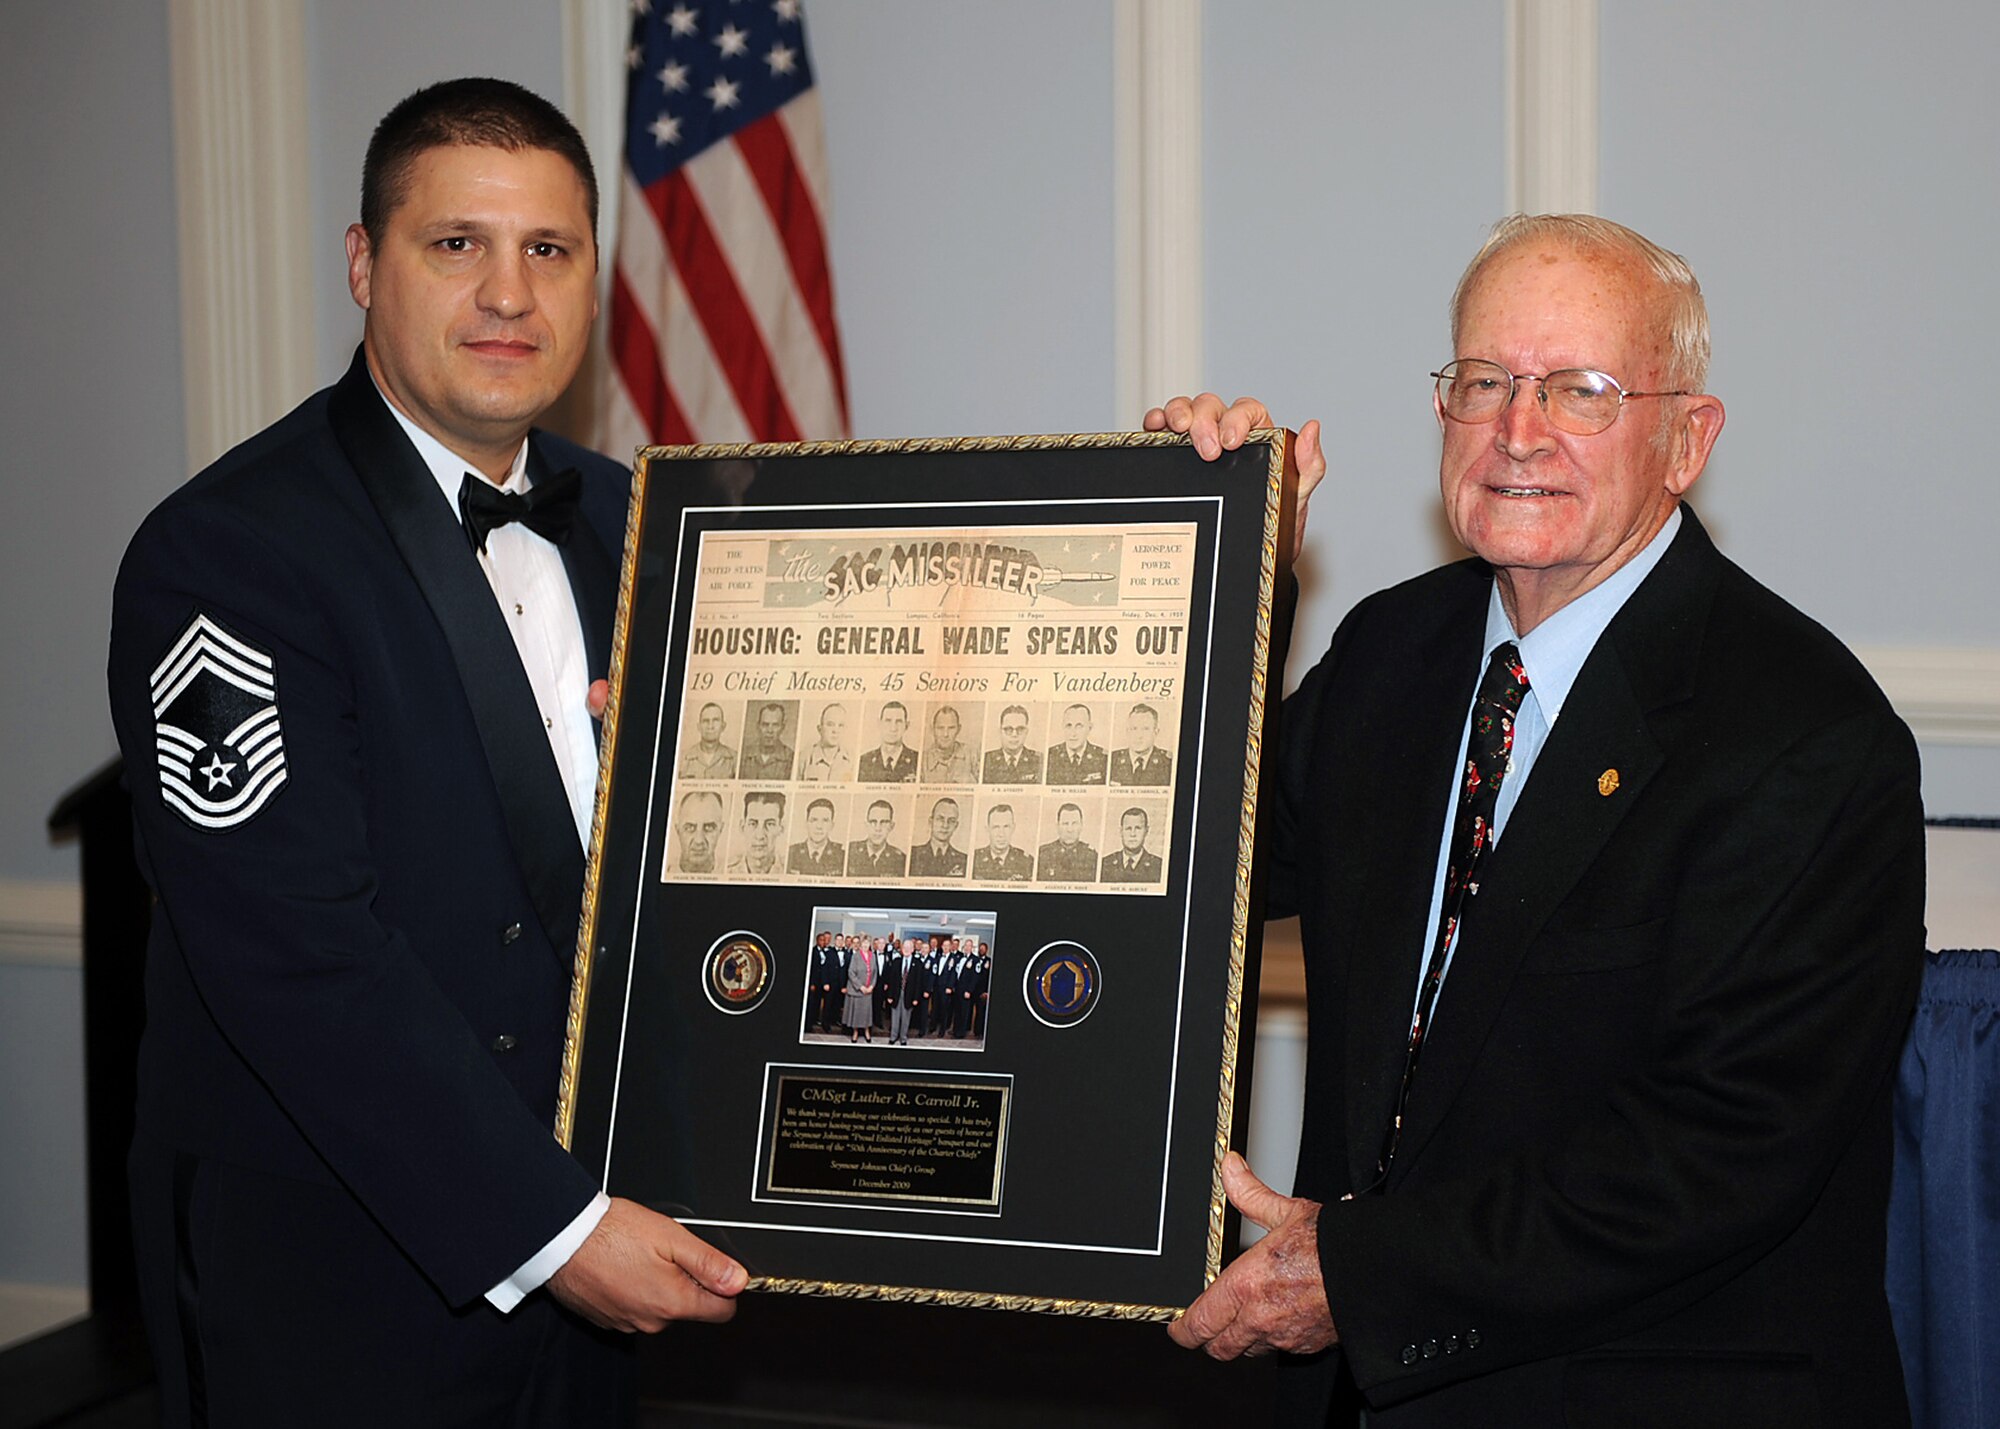 Chief Master Sgt. Michael Garrou, 4th Mission Support Group superintendent, presents an original newspaper clip from Vandenberg Air Force Base, Calif., recognizing Luther Carroll's promotion to chief master sergeant during the Enlisted Heritage Banquet on Seymour Johnson Air Force Base, N.C., Dec. 1, 2009. Mr. Carroll was one of 620 master sergeants to receive the promotion of chief master sergeant on Dec. 1, 1959, the group later became known as the Charter Chiefs. (U.S. Air Force photo/Senior Airman Ciara Wymbs) 